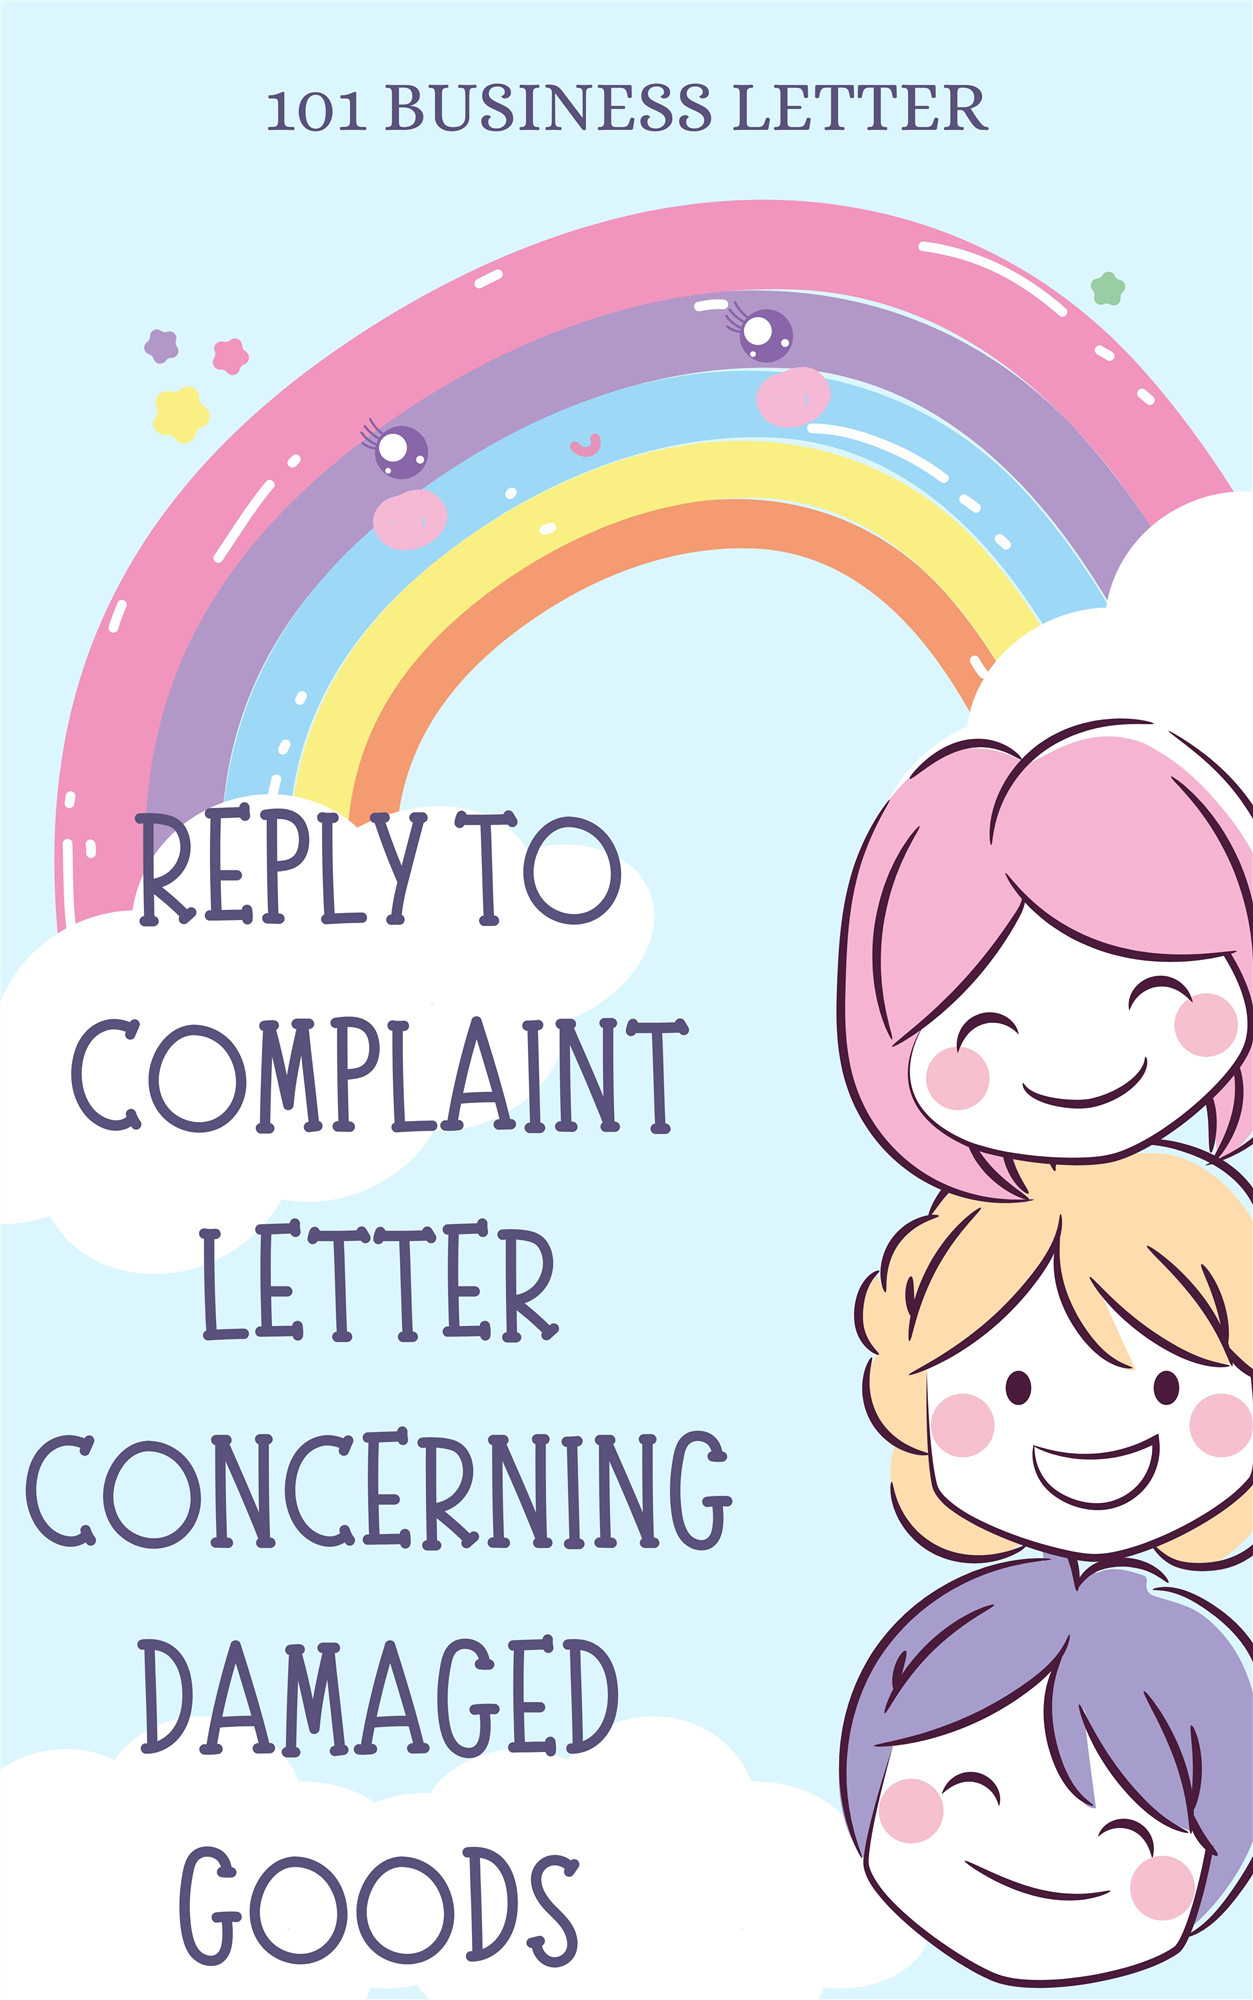 reply to complaint email concerning damaged goods